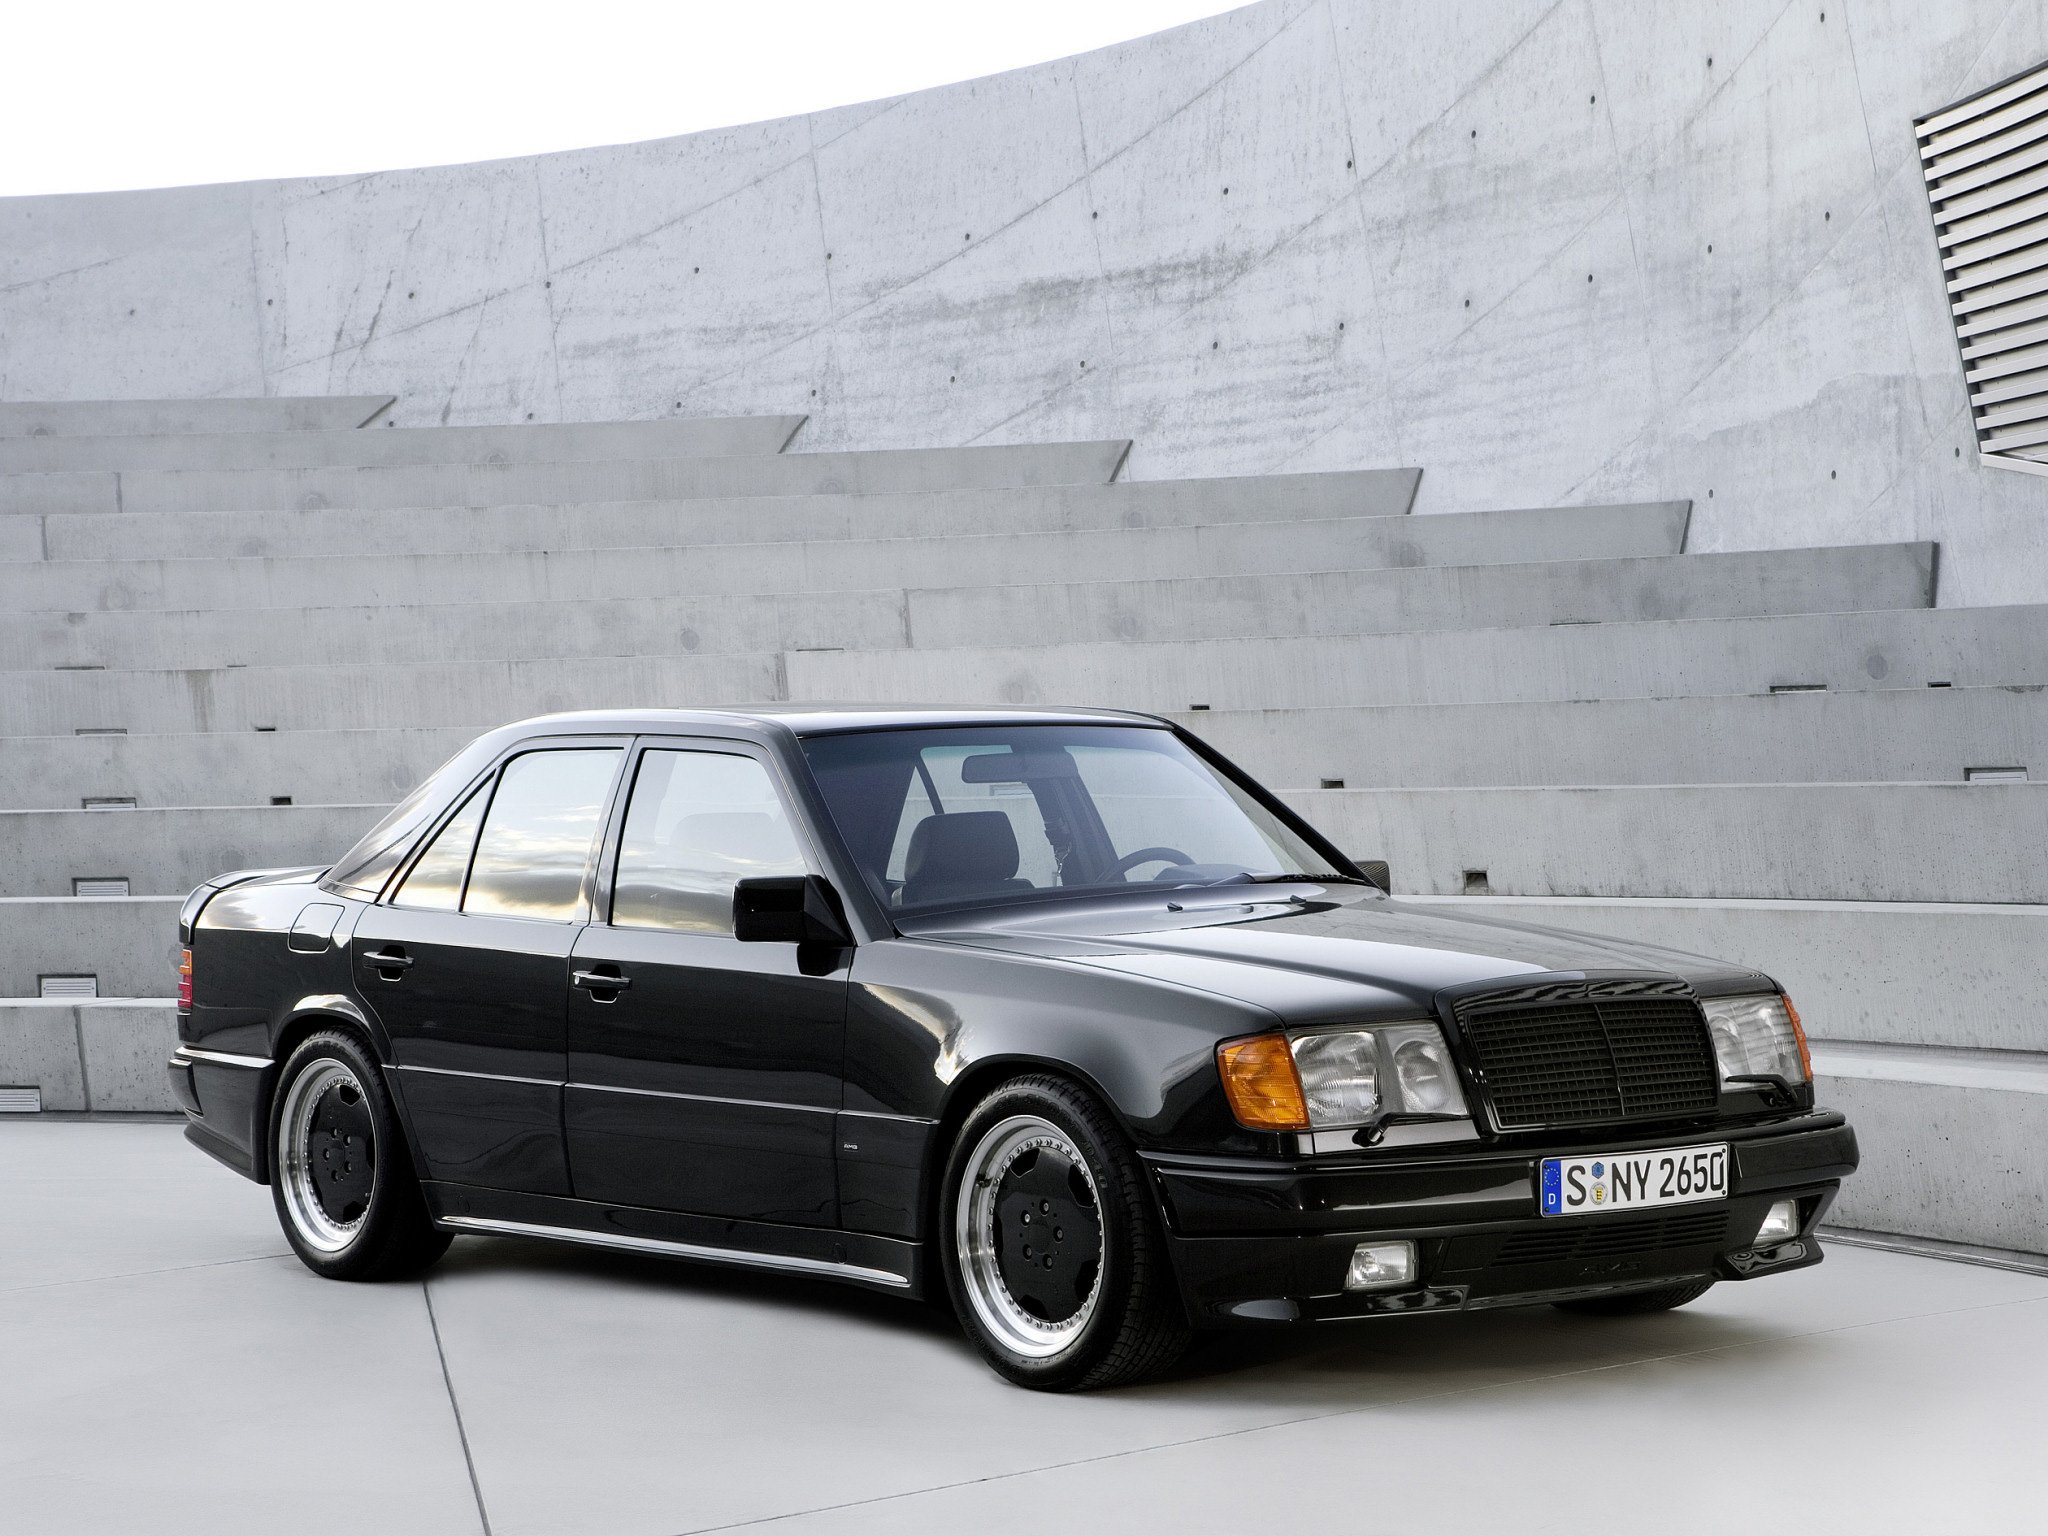 1988 91 Mercedes Benz Amg 300e Hammer W124 300 Wallpapers Hd Desktop And Mobile Backgrounds